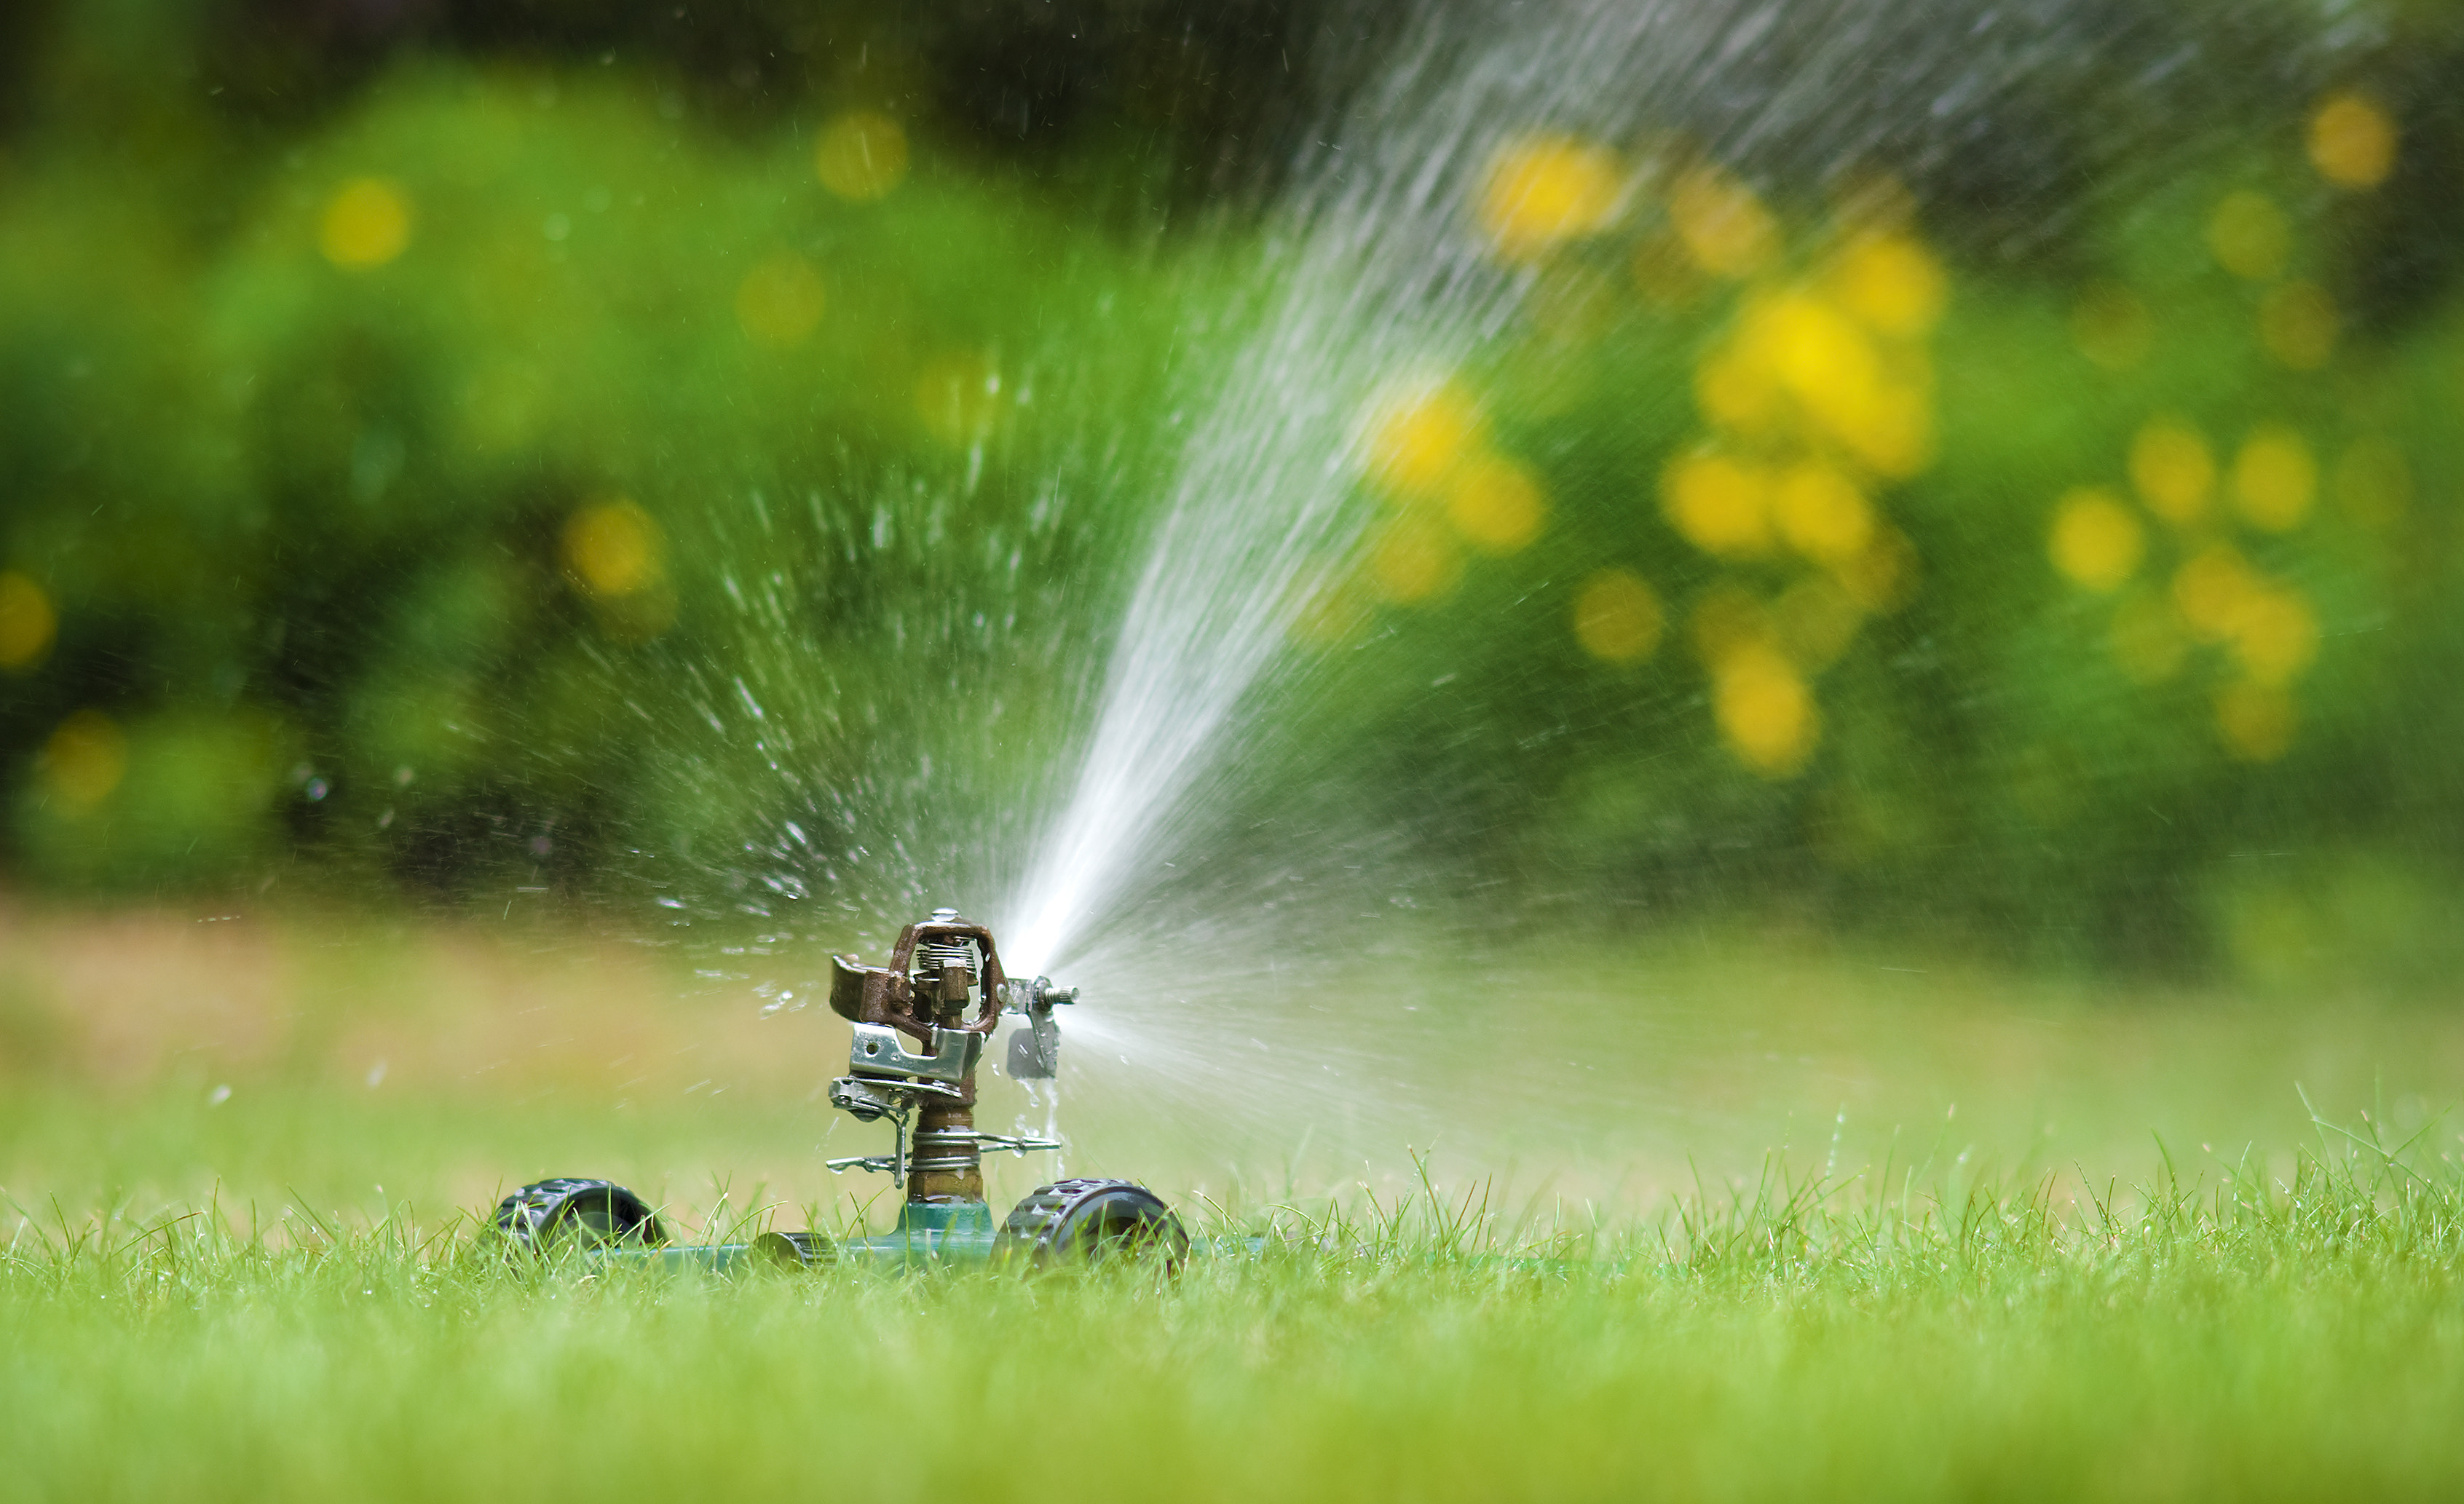 How to Reduce Water Usage on Home Lawns | myhomeTURF